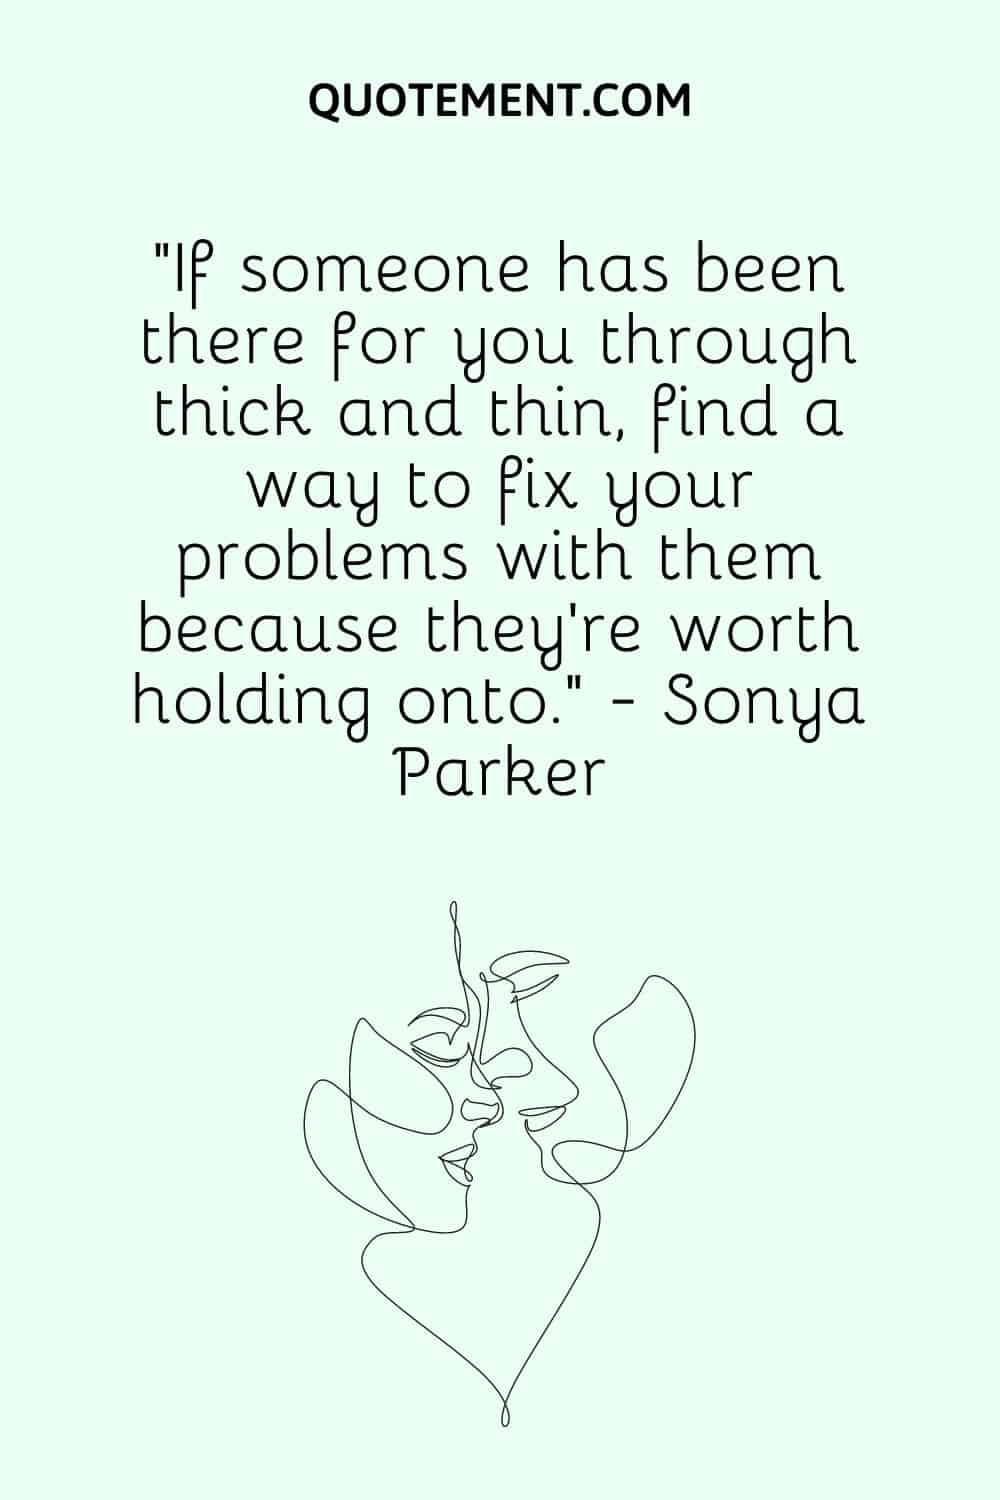 “If someone has been there for you through thick and thin, find a way to fix your problems with them because they're worth holding onto.” - Sonya Parker